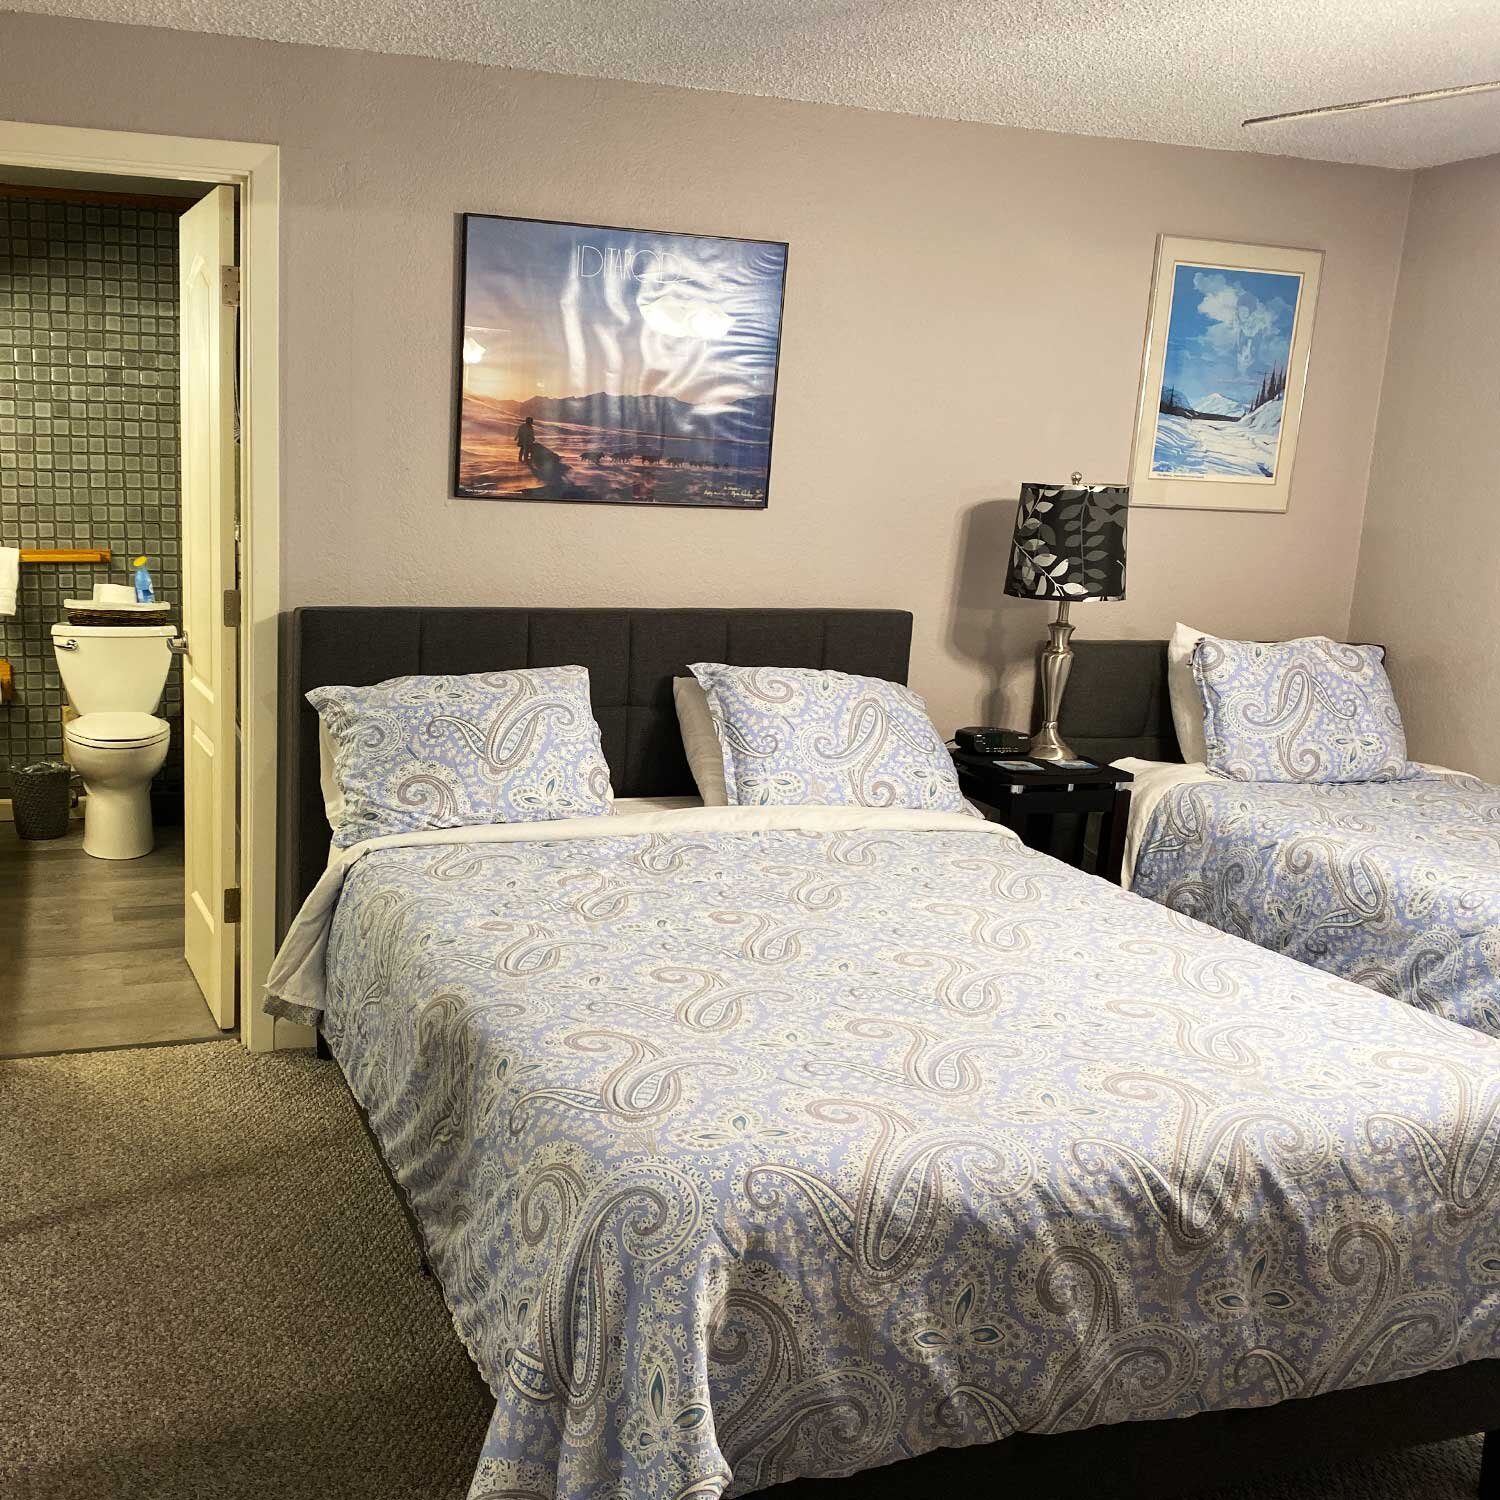 Downtown Bed Breakfast Rooms, One Twin Bed